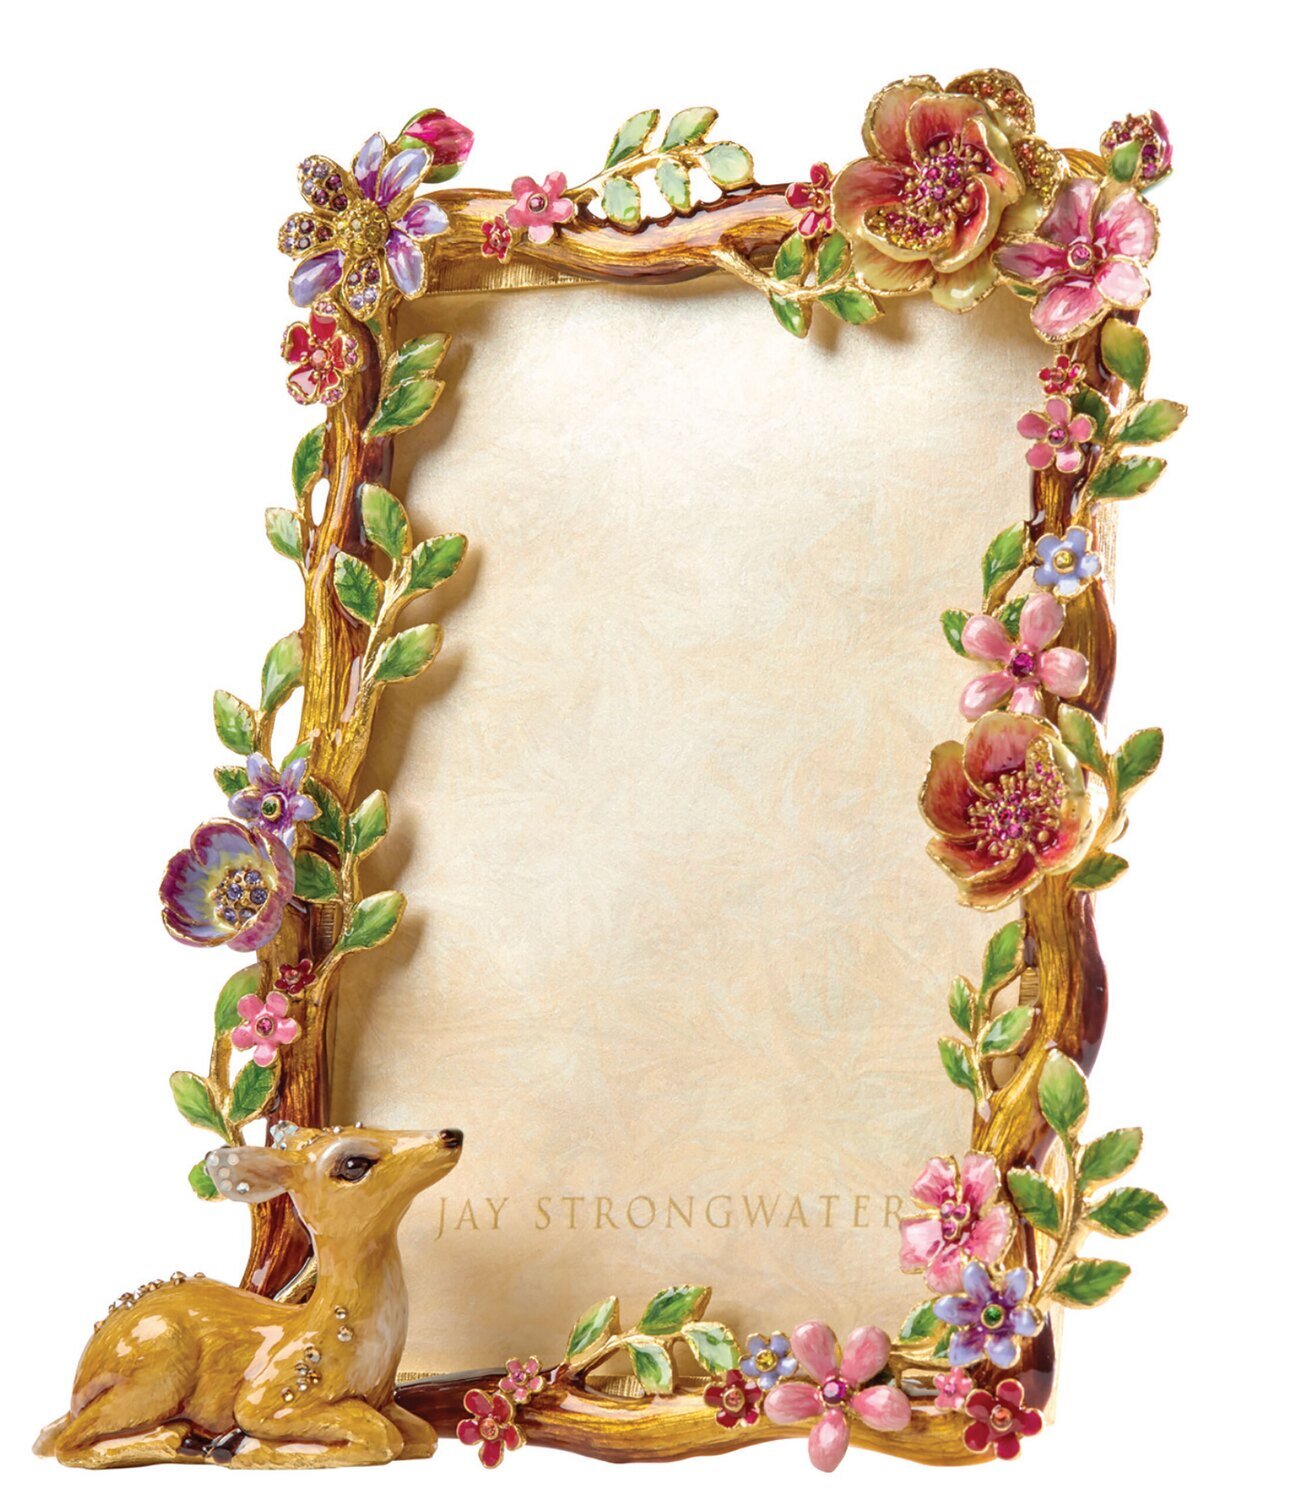 Jay Strongwater Willow Deer 5 x 7 Inch Picture Frame Natural SPF5894-280